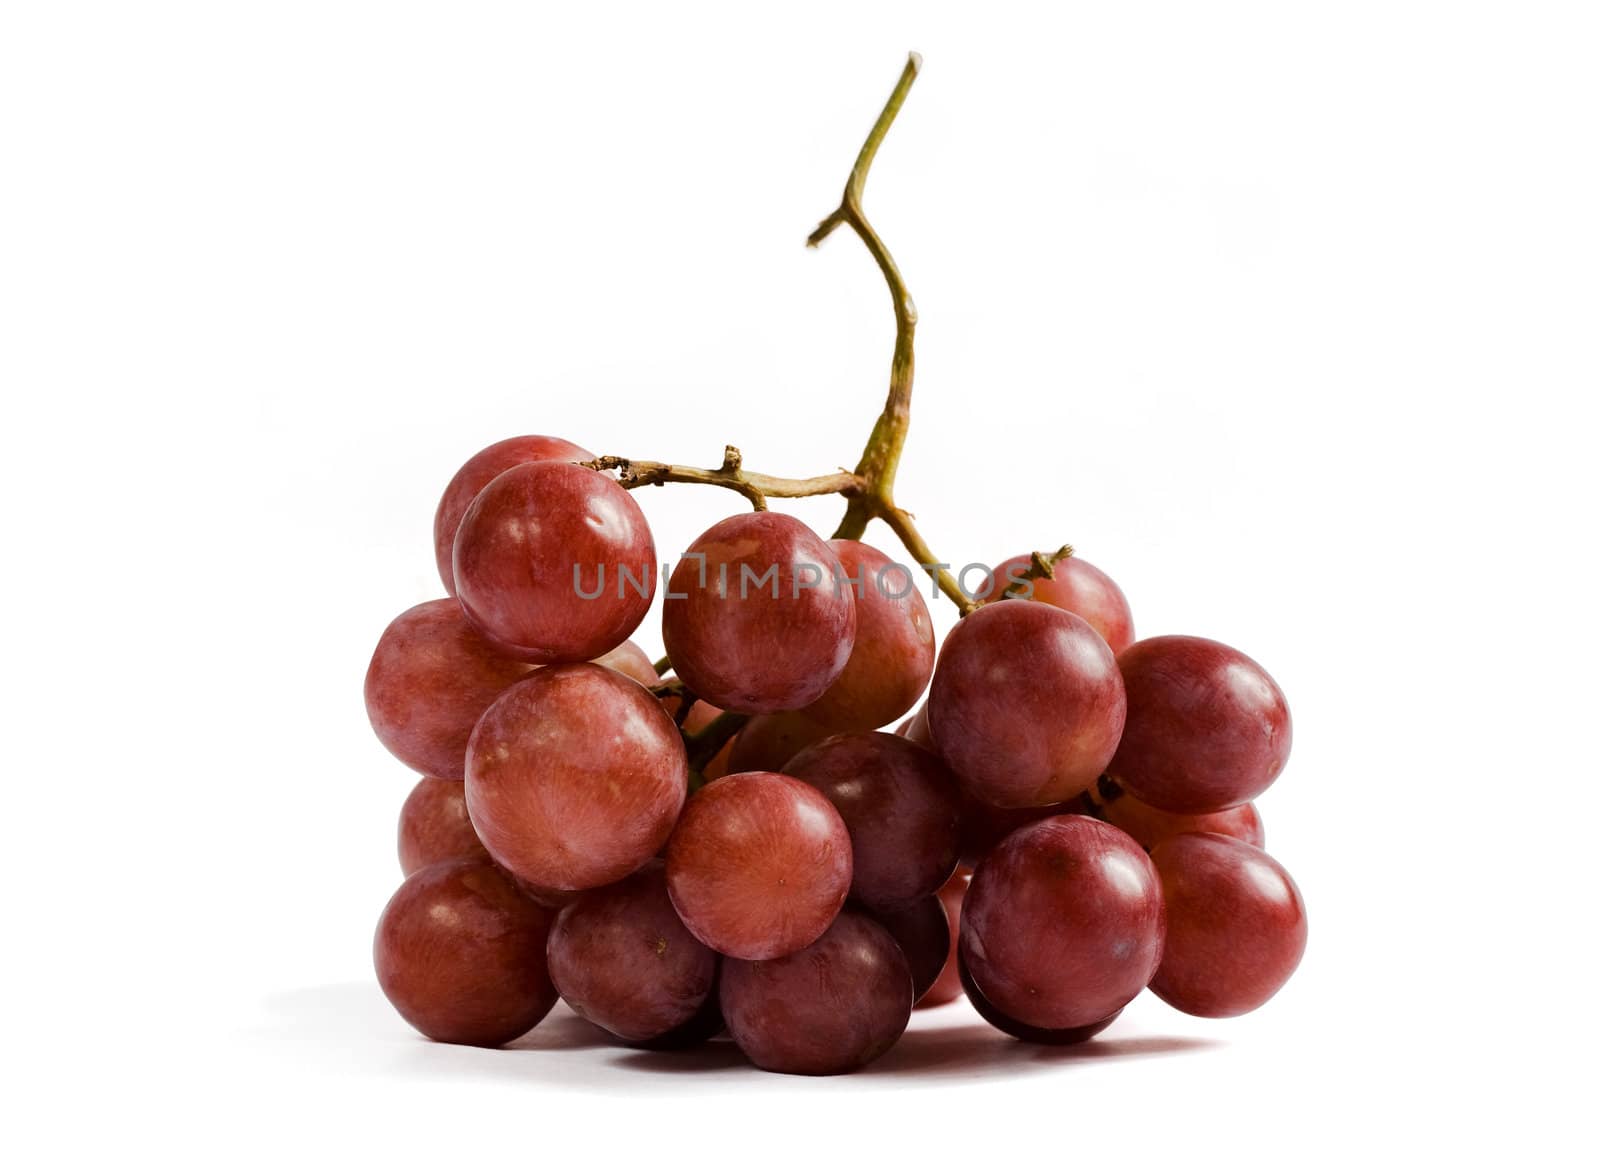 Bunch of red grapes isolated on white background. Clipping path included